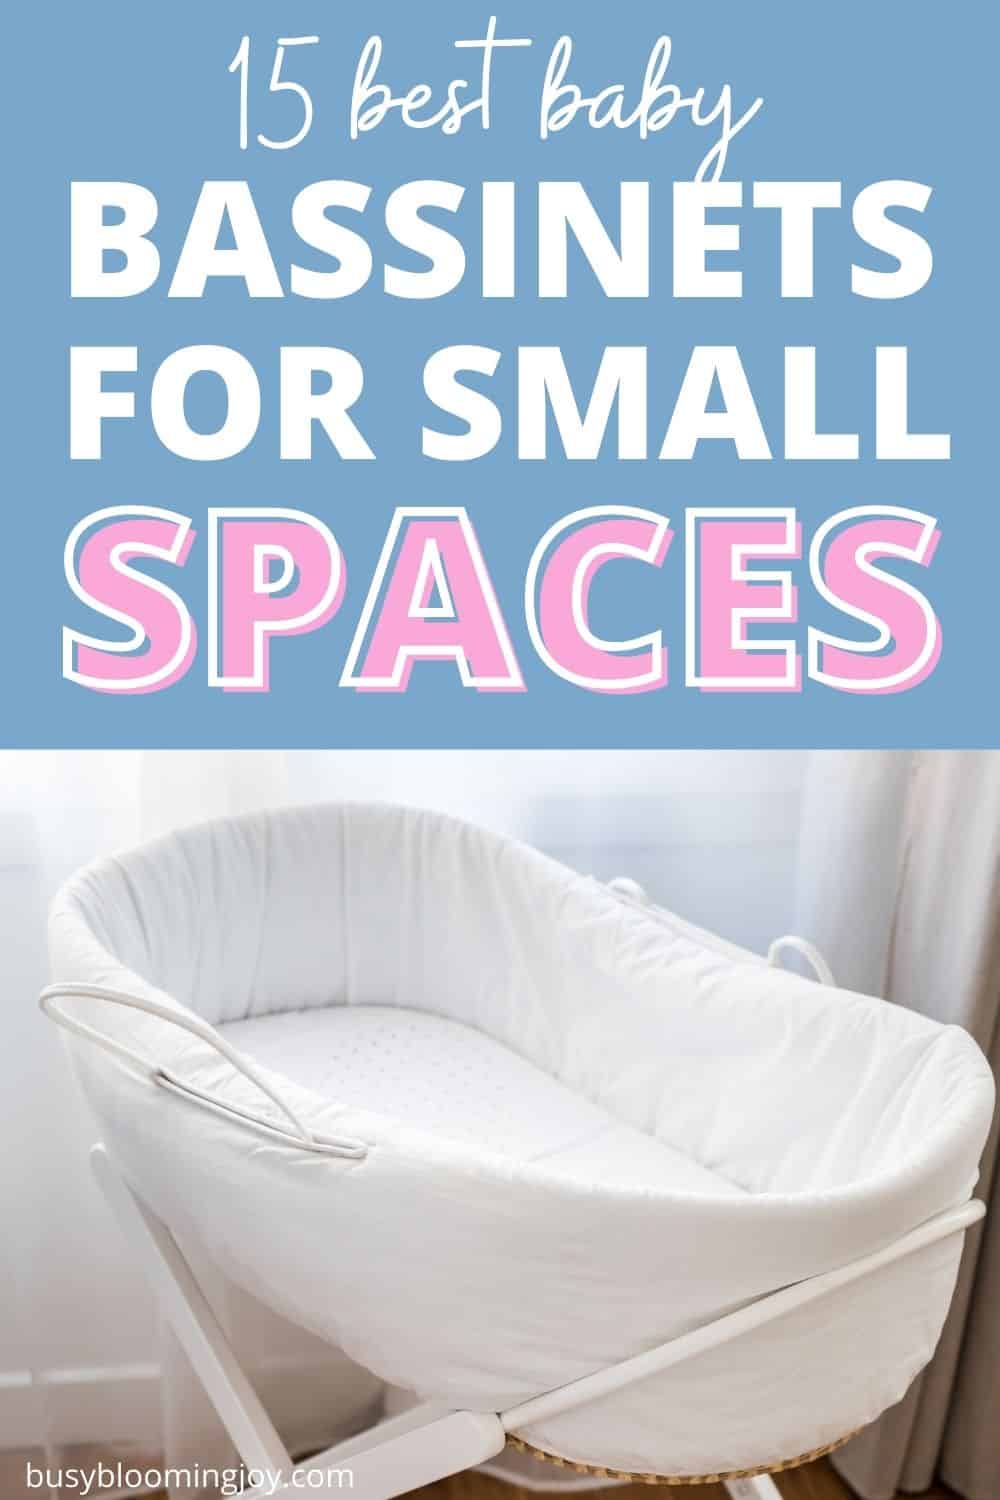 BASSINET FOR SMALL SPACES FEATURE